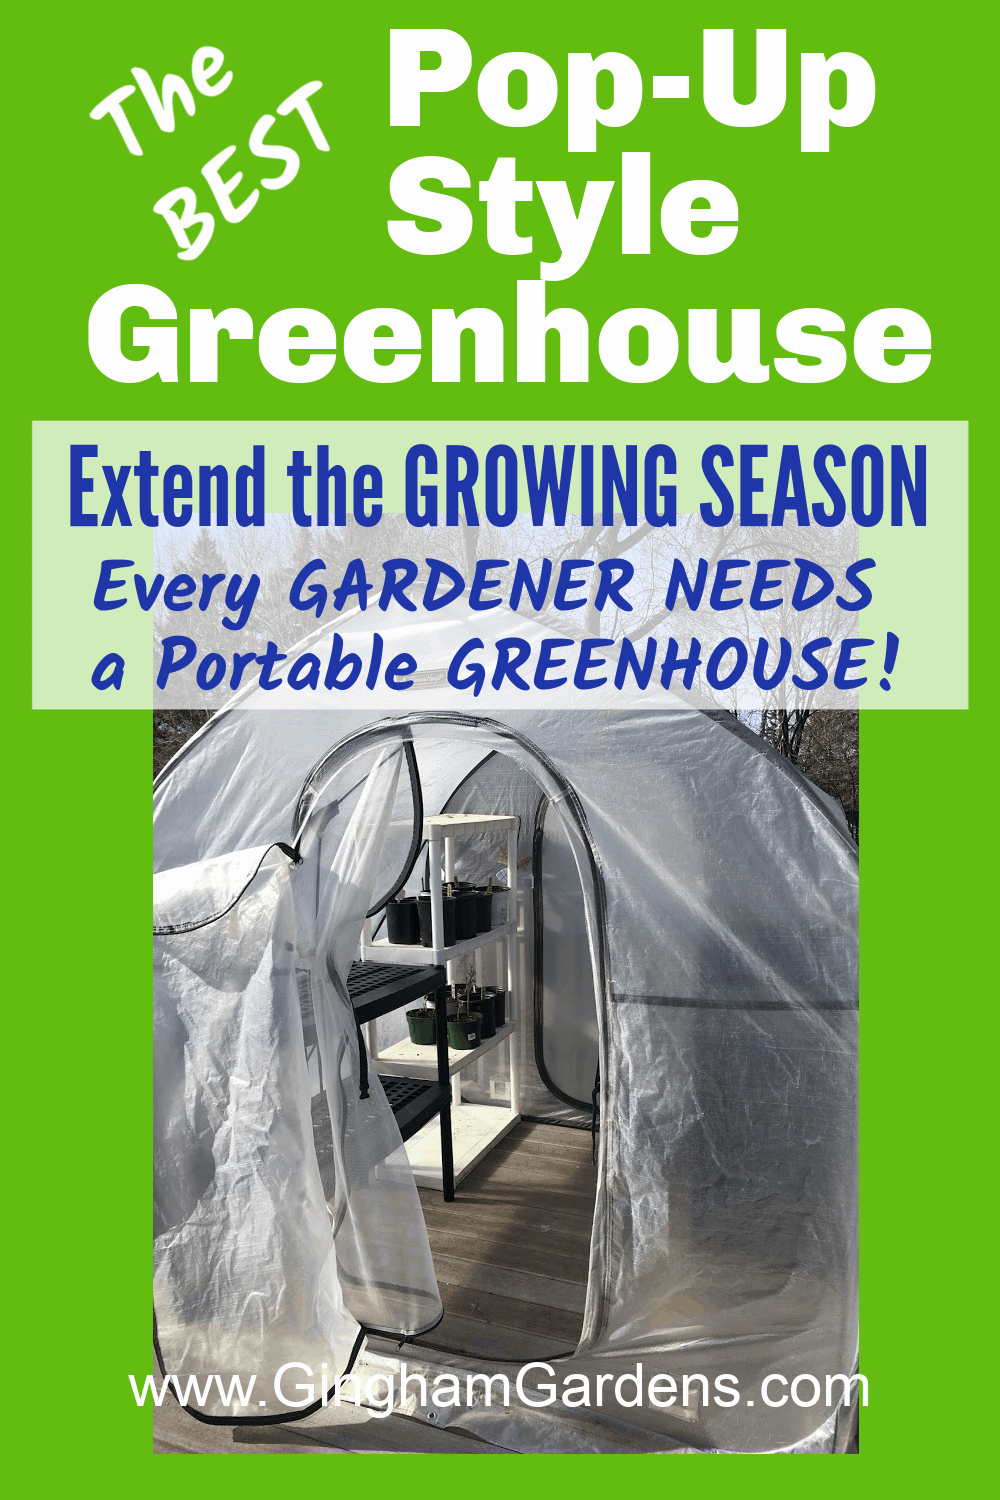 Image of a pop-up greenhouse with text overlay - the best pop-up style greenhouse